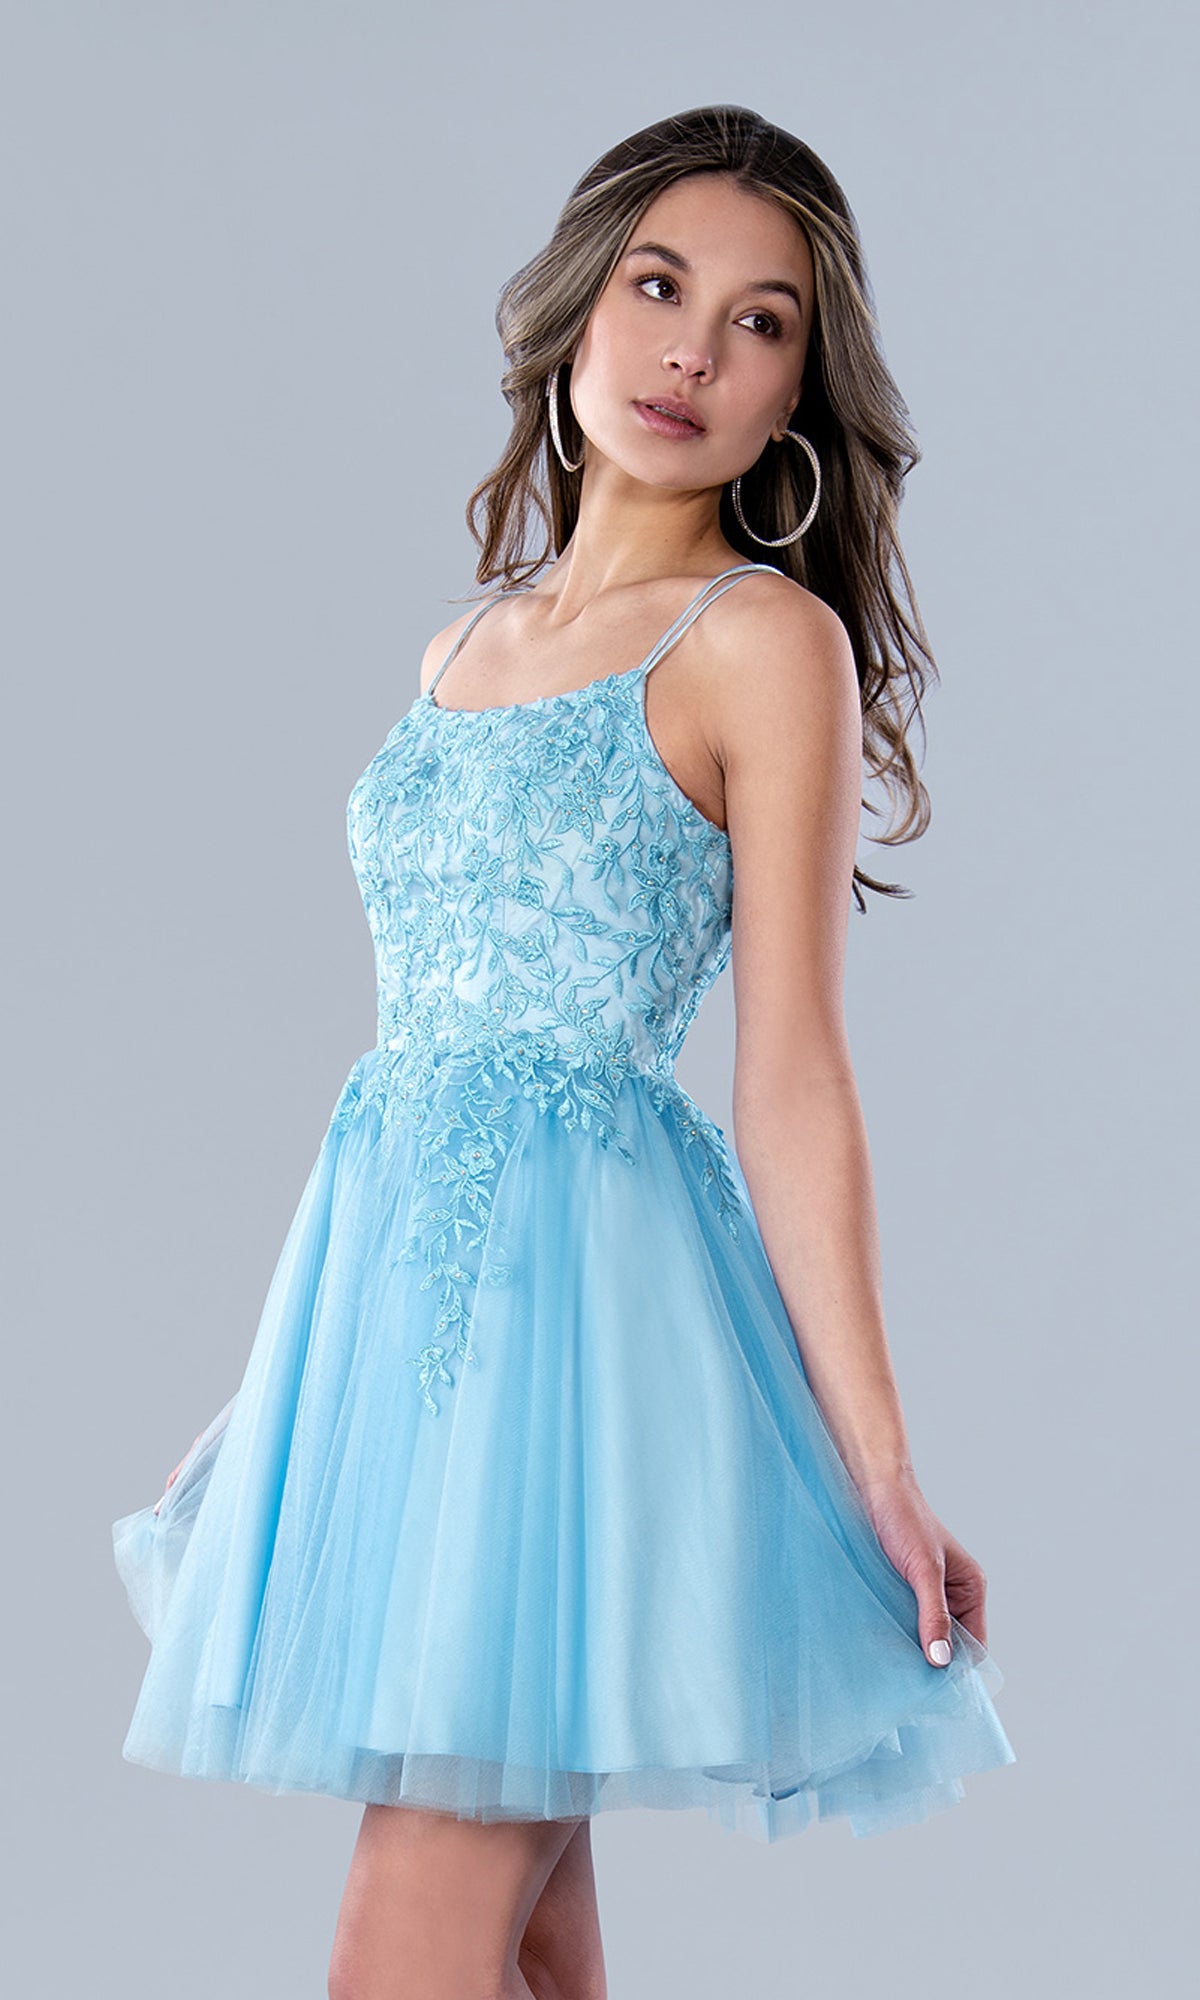 Short Blue A-Line Homecoming Dress 22770 - PromGirl